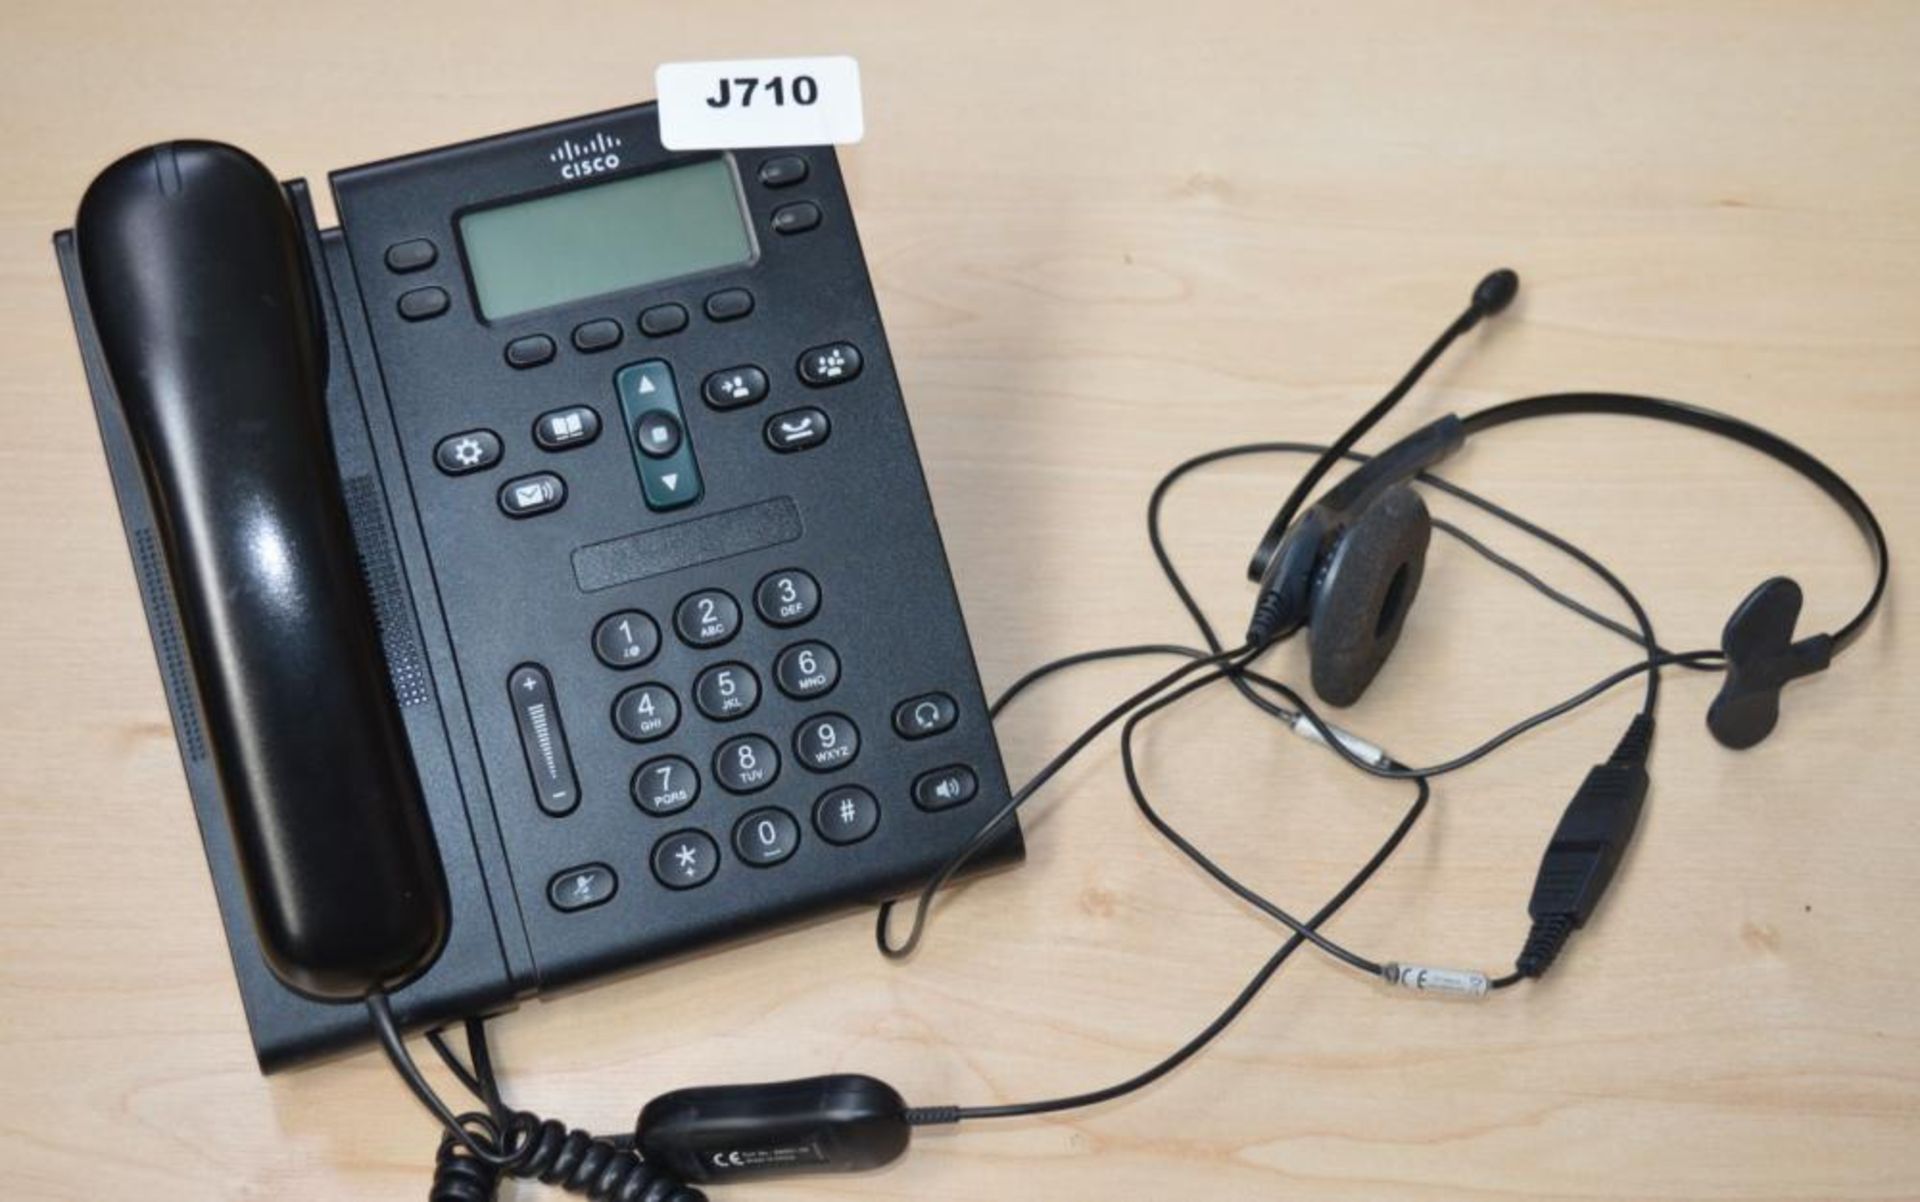 1 x Cisco CP-6941 Unified IP Phone Handset With Headset - From Working Office Environment Presented